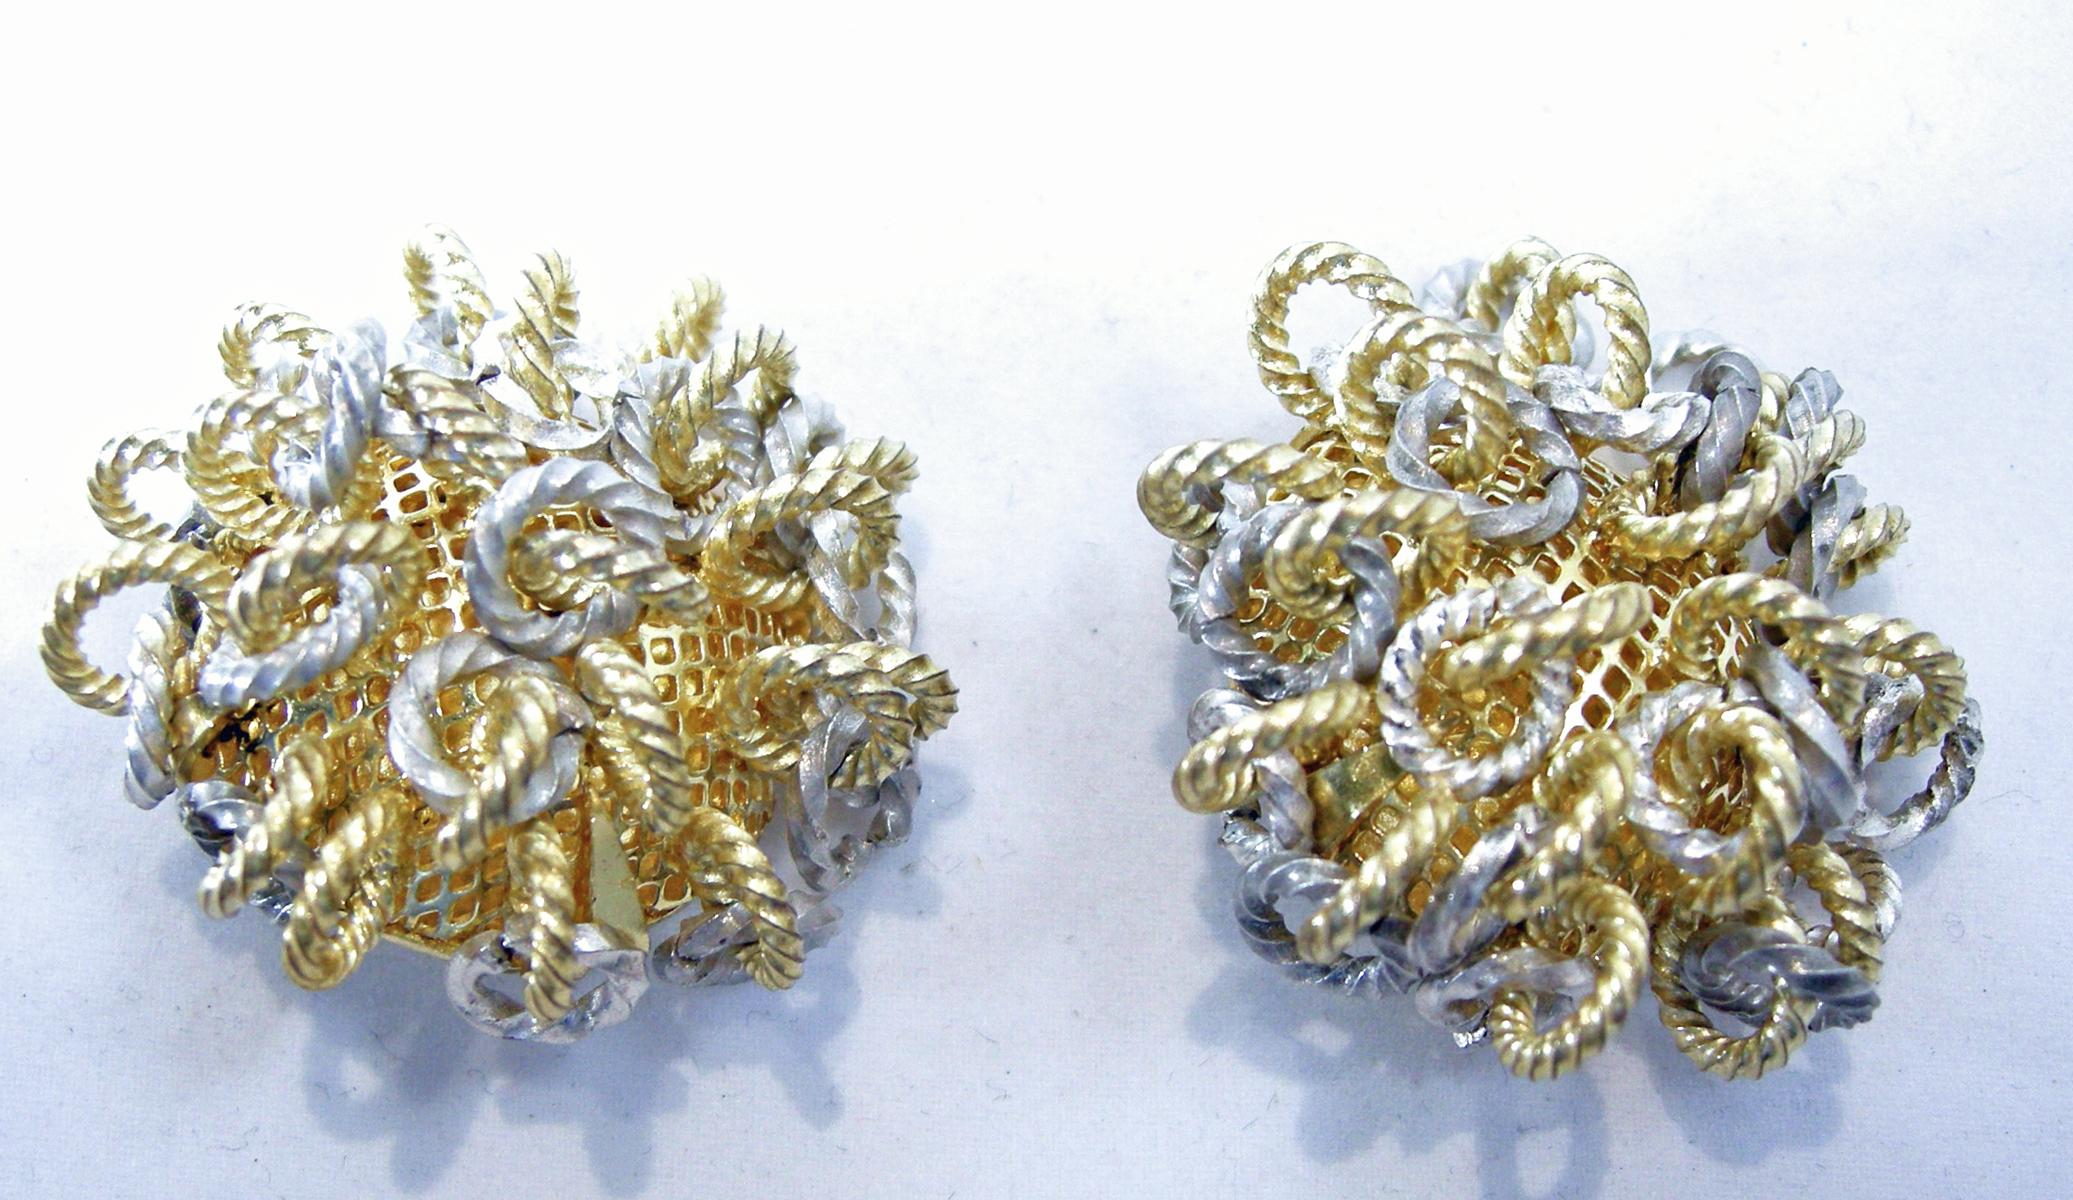 These vintage French earrings have twisted silver tone loops dangling from a gold tone setting.  In excellent condition, these clip earrings measure 1-1/2” in diameter/wide.